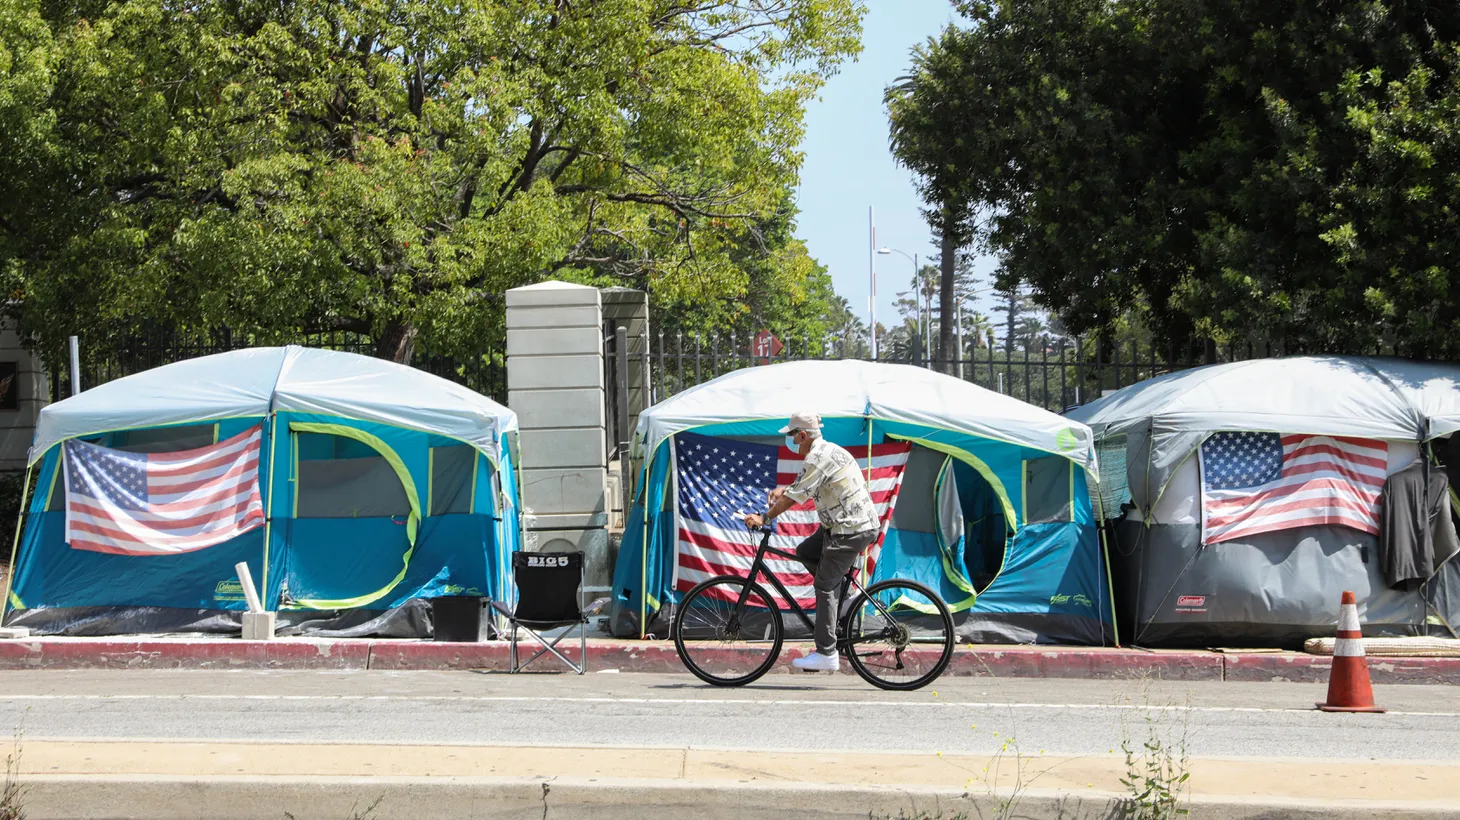 Military veterans who lived at the Veterans Row homeless encampment made sure it had a neat, orderly and patriotic look to it.